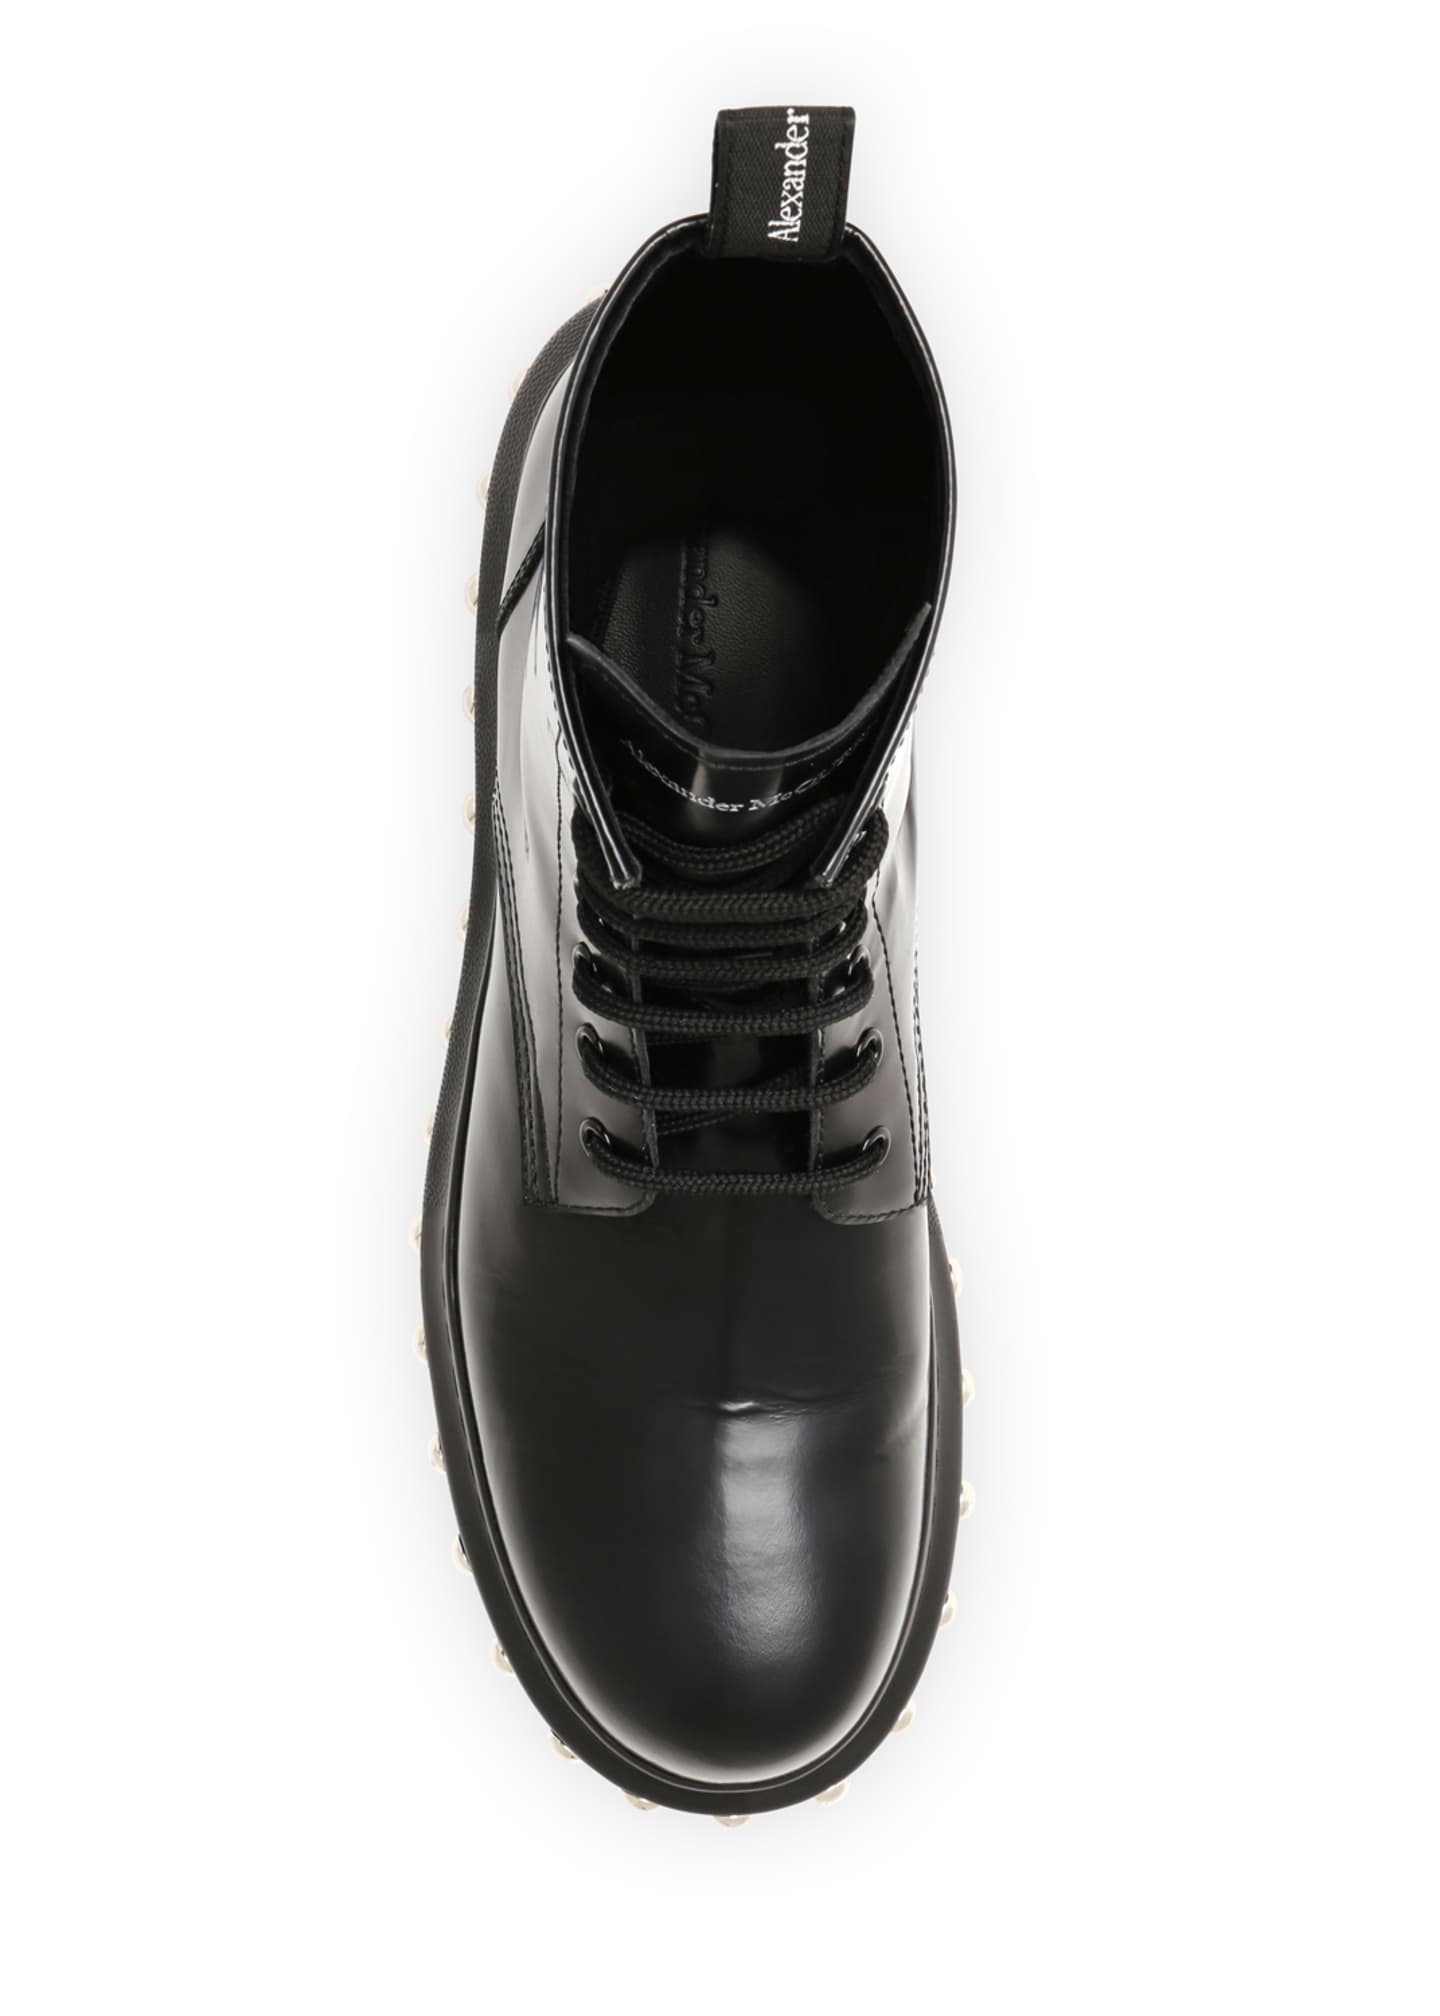 Alexander McQueen Men's Hybrid Lace-Up Boots w/ Studded Sole - Bergdorf ...